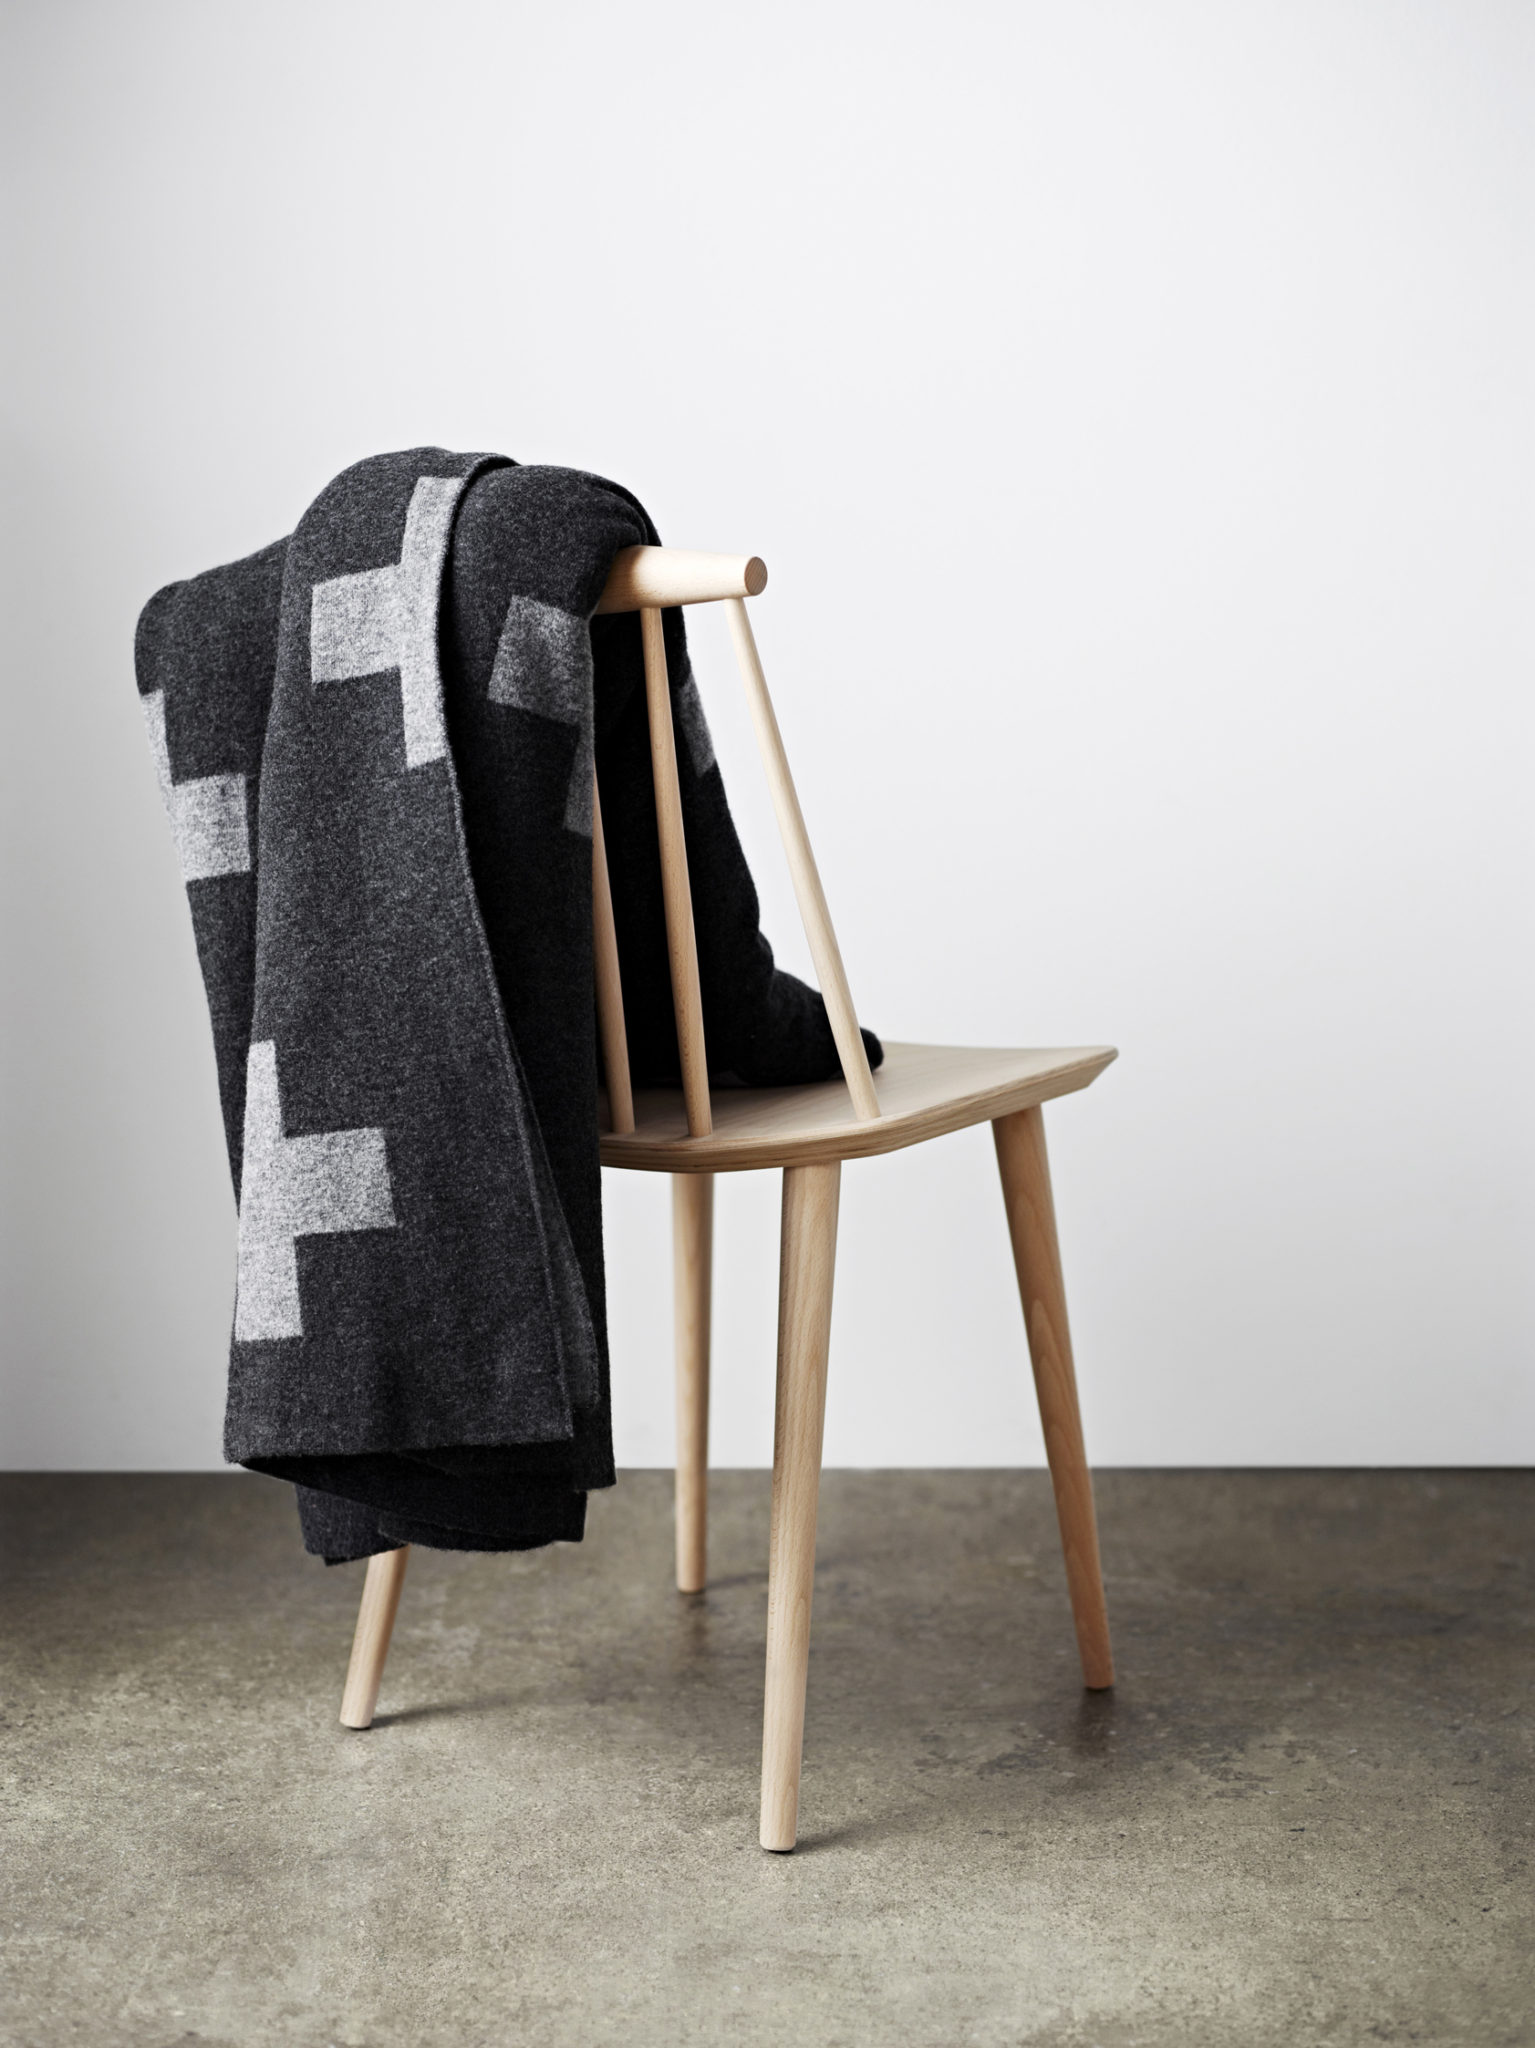 This throw reminds me of the even popular Crux Blanket by Swedish designer Pia Wallen